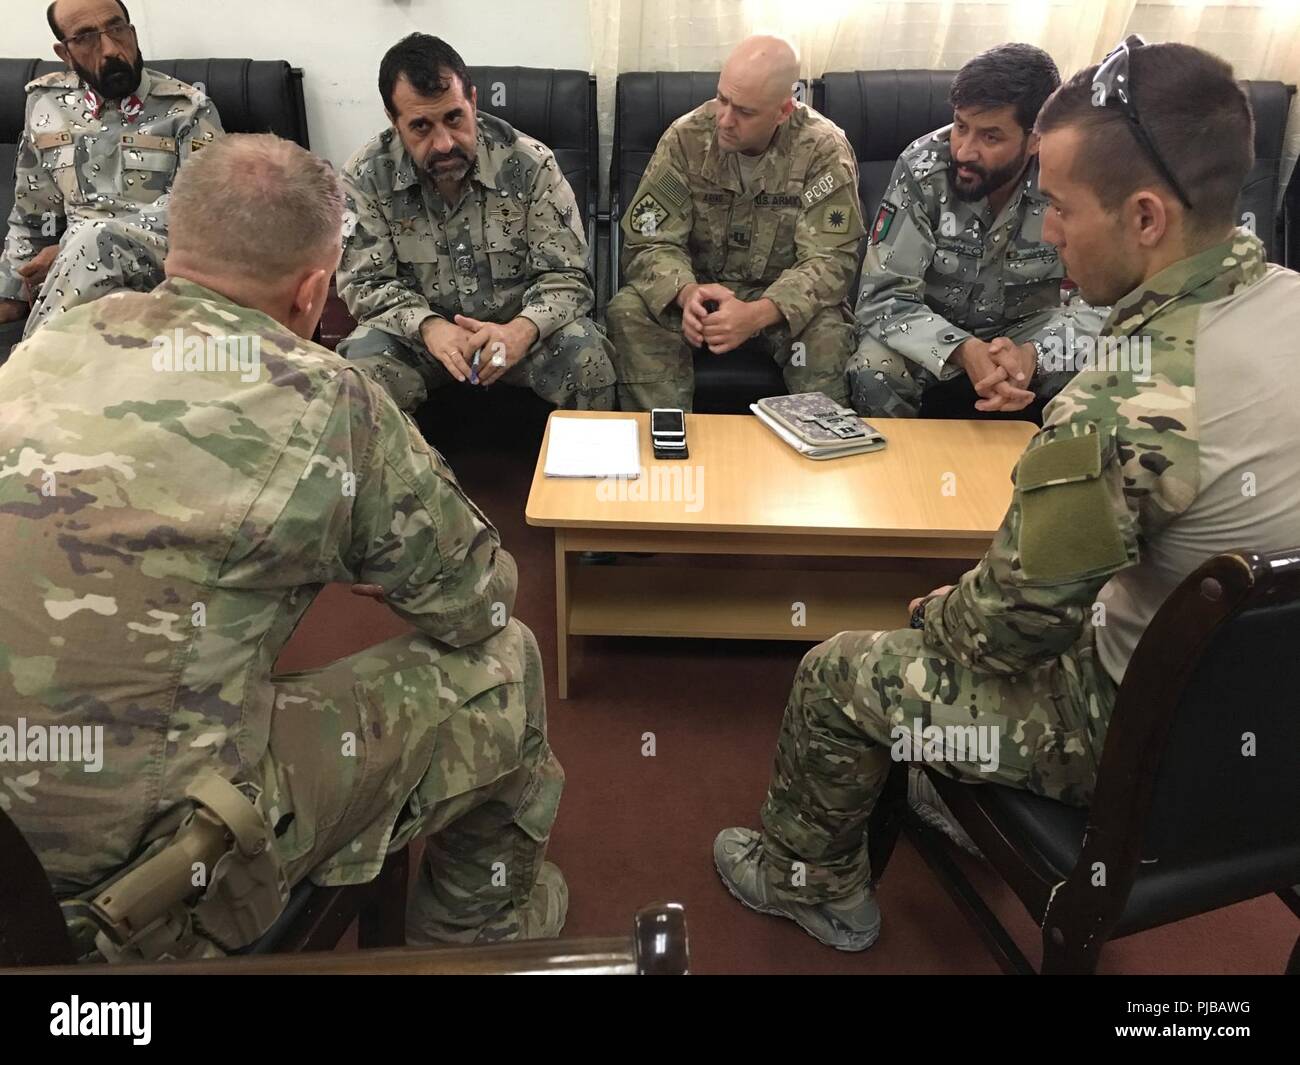 ZABUL PROVINCE, Afghanistan (July 02, 2018) -- Brig. Gen. Mirwais Noorzai, Provincial Chief of Police, Zabul province, along with two of his officers meet with advisors from the NATO-led Resolute Support Security Forces Assistance Brigade at the Afghan National Army 205th Corps, 2nd Brigade Headquarters. The Afghan National Army is working closely with the Afghan National Police in the Afghan-led offensive operations in the south. (NATO Stock Photo